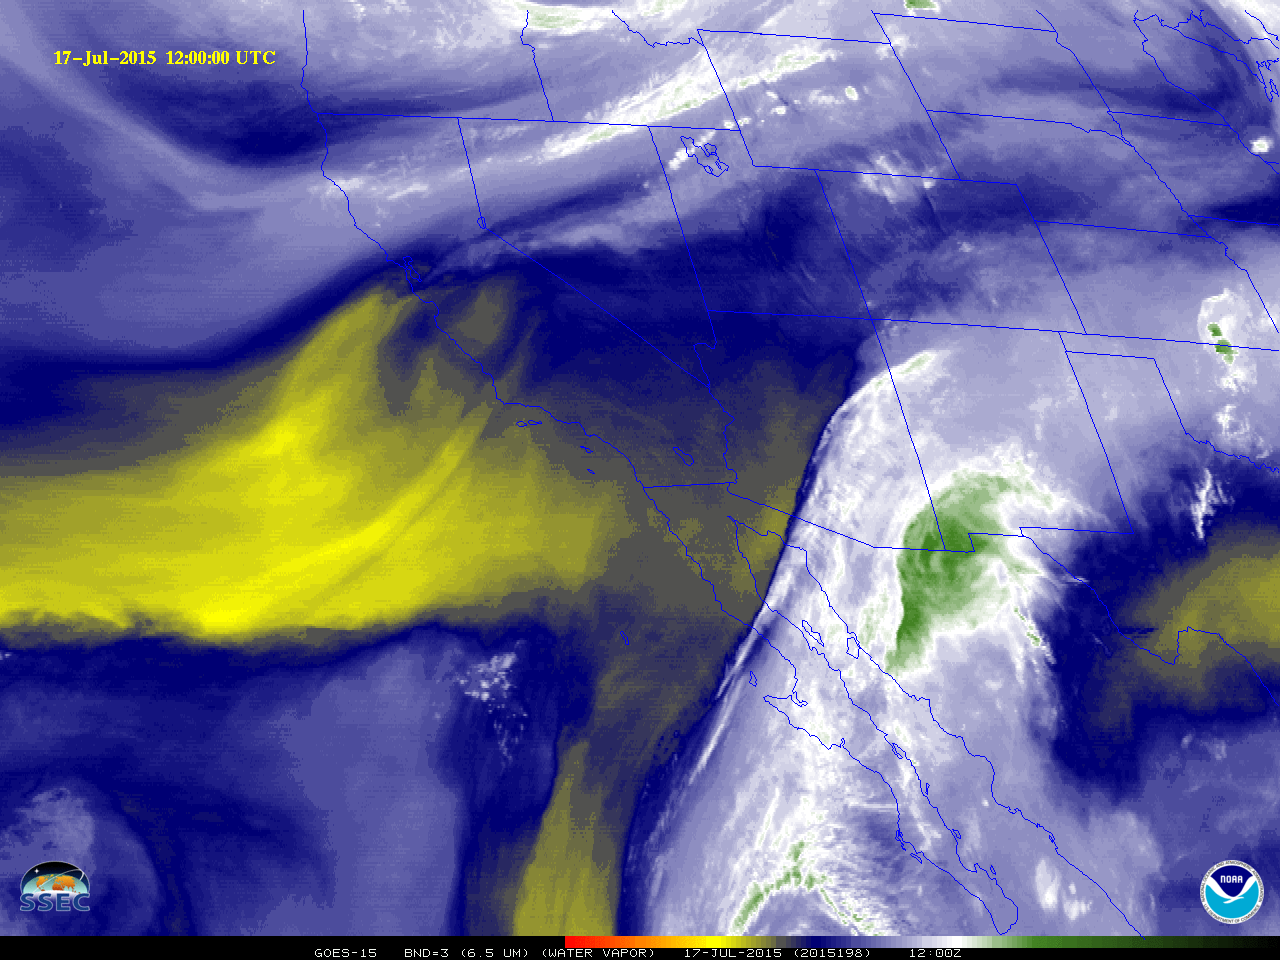 GOES-15 Infrared Water Vapor (6.5 µm) Images  (click to play animation)